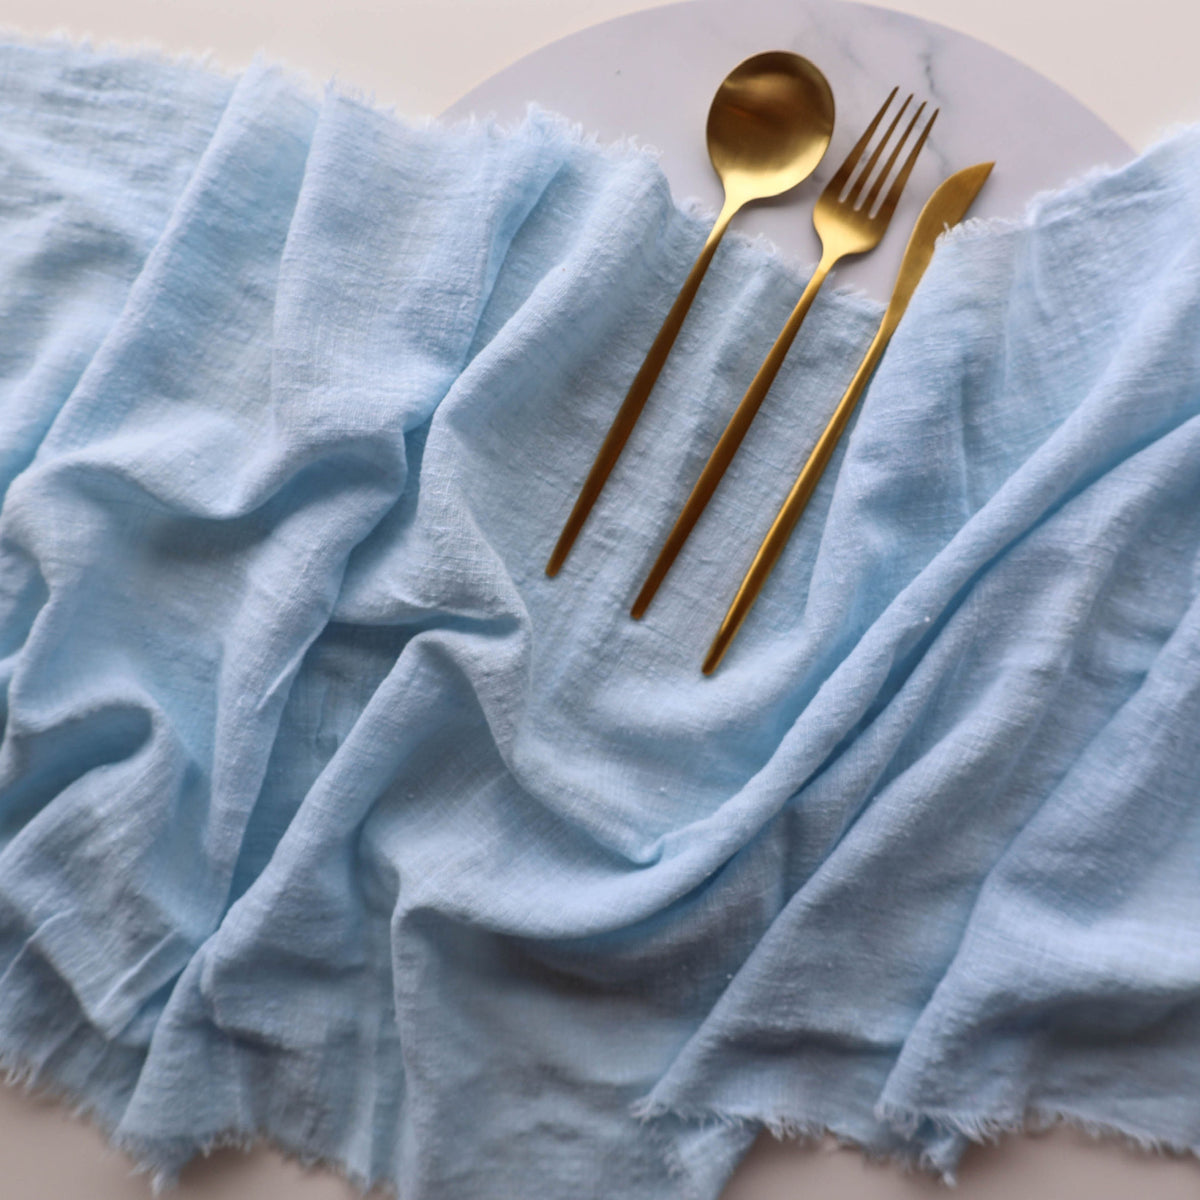 Baby Blue Rustic Cotton Table Runners - 3m